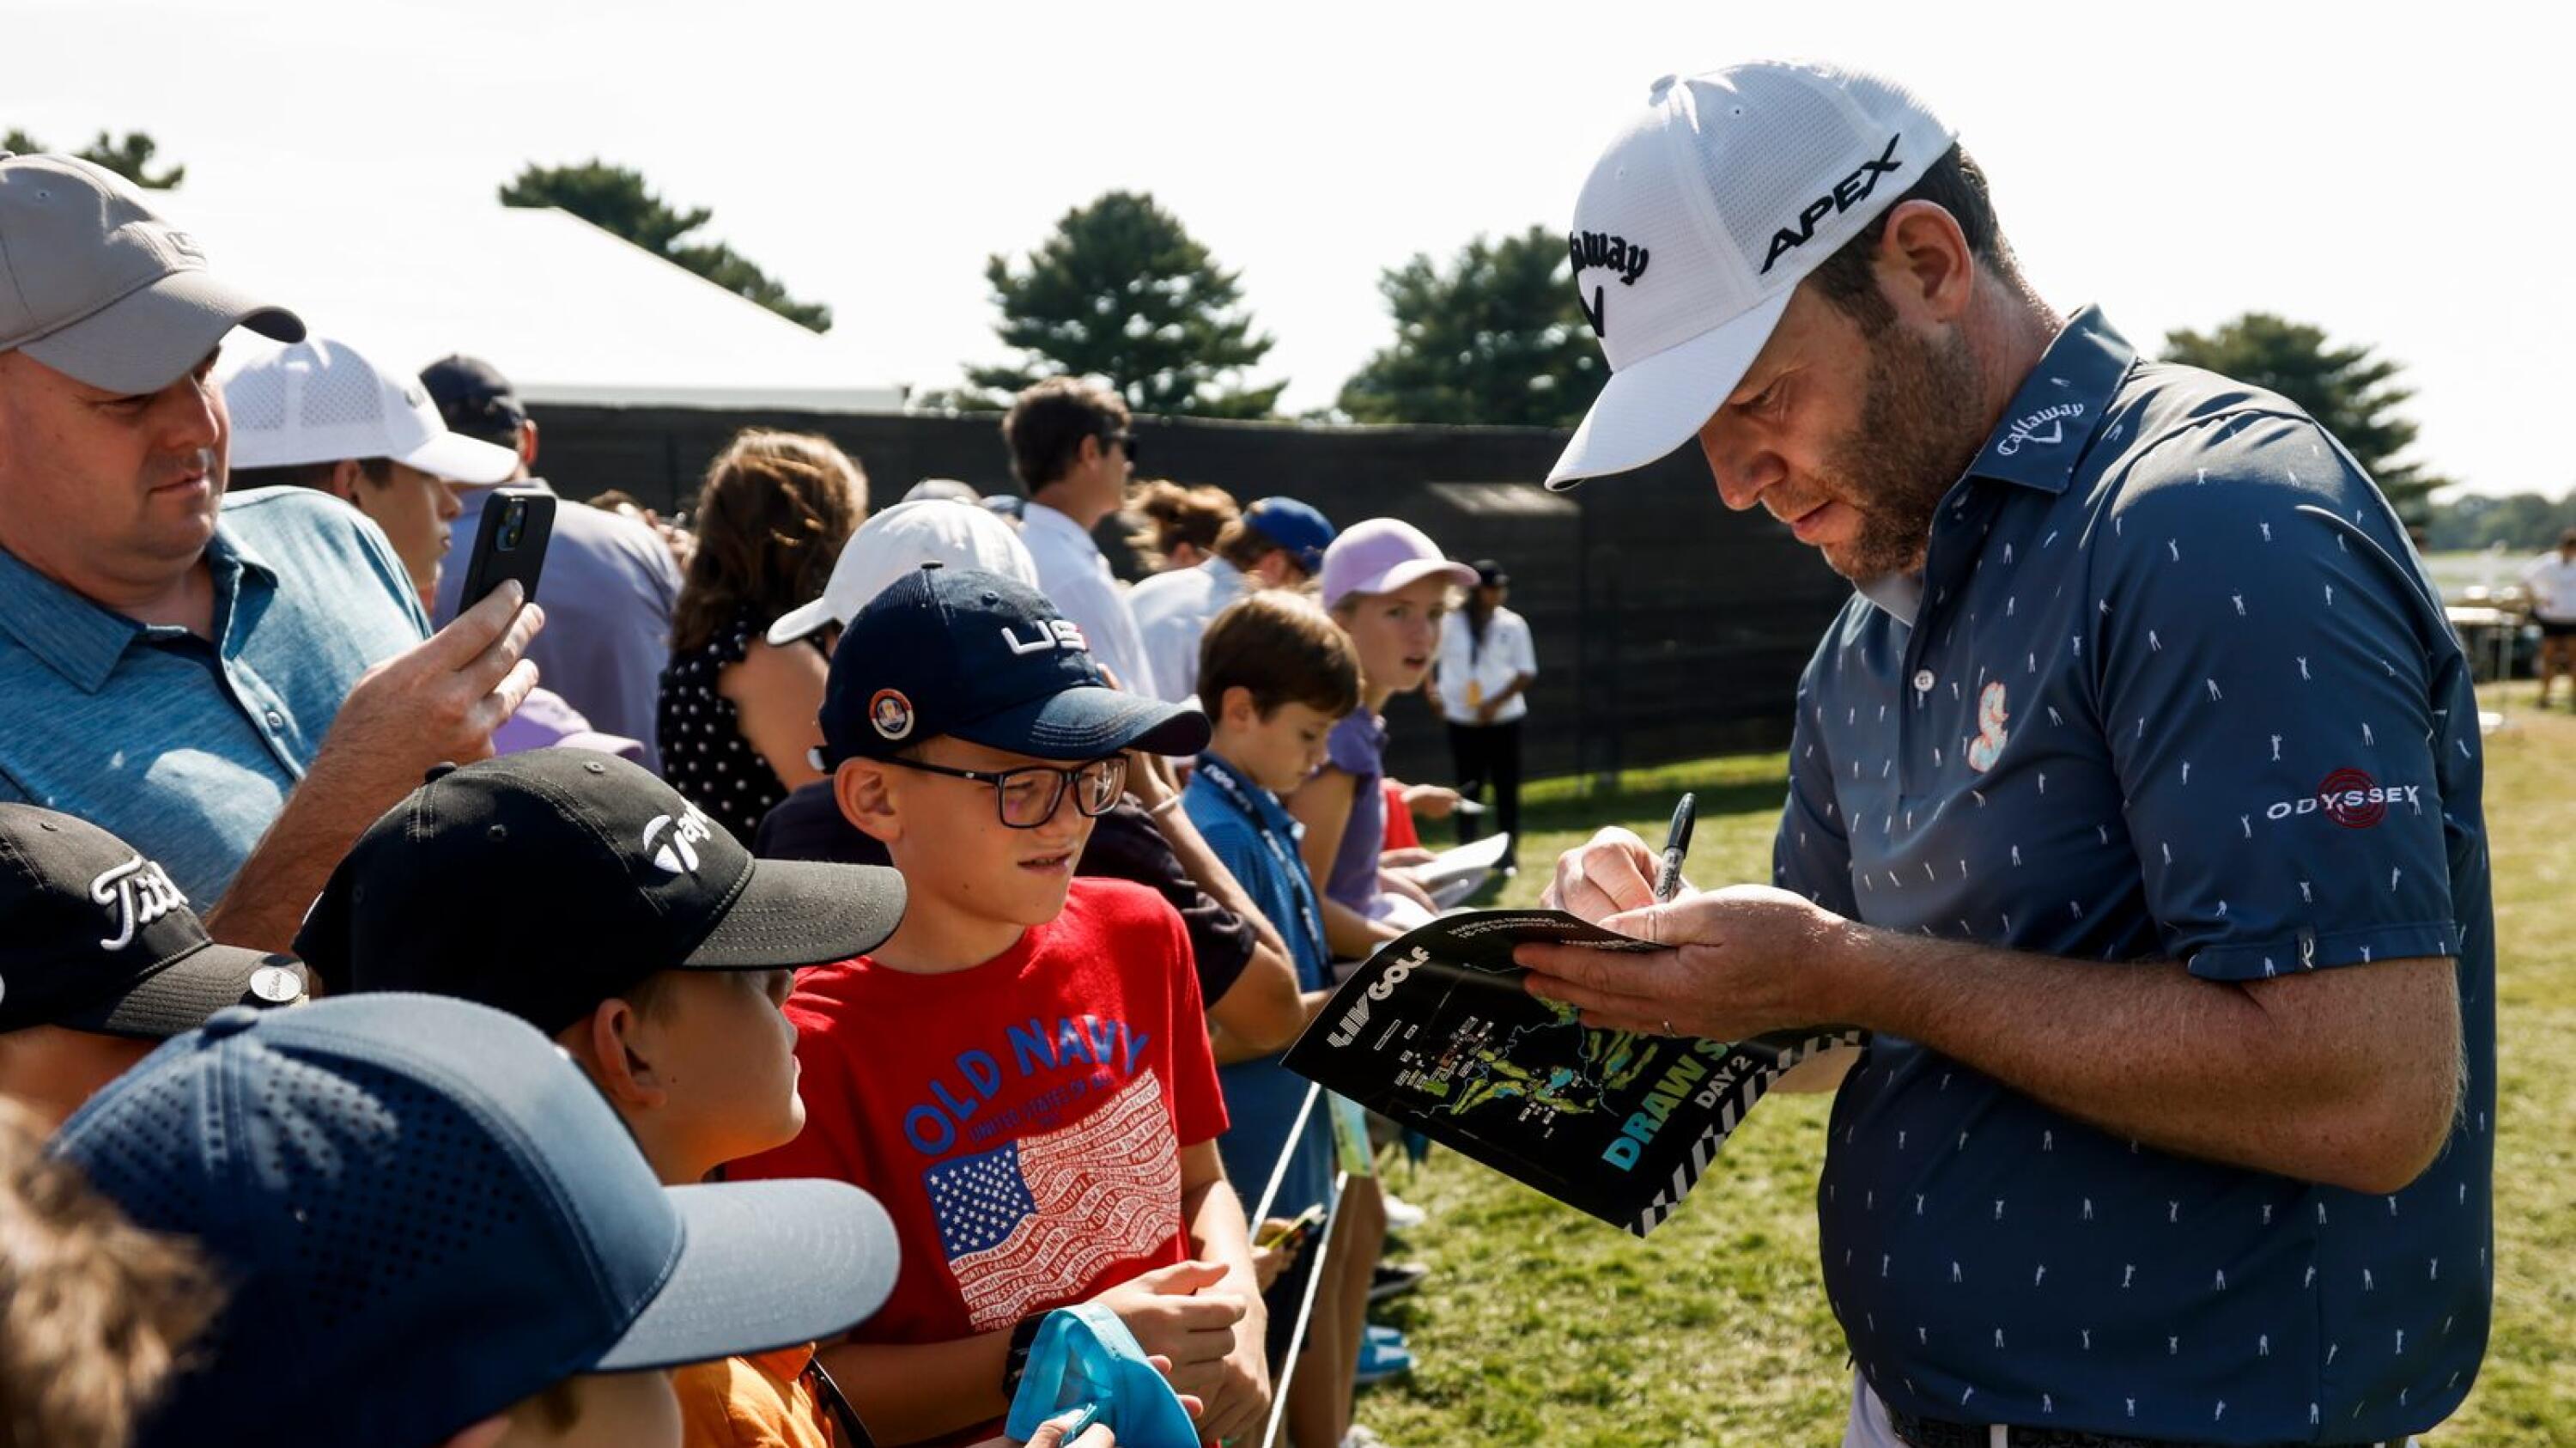 South African Branden Grace signing autographs at a LIV Golf event